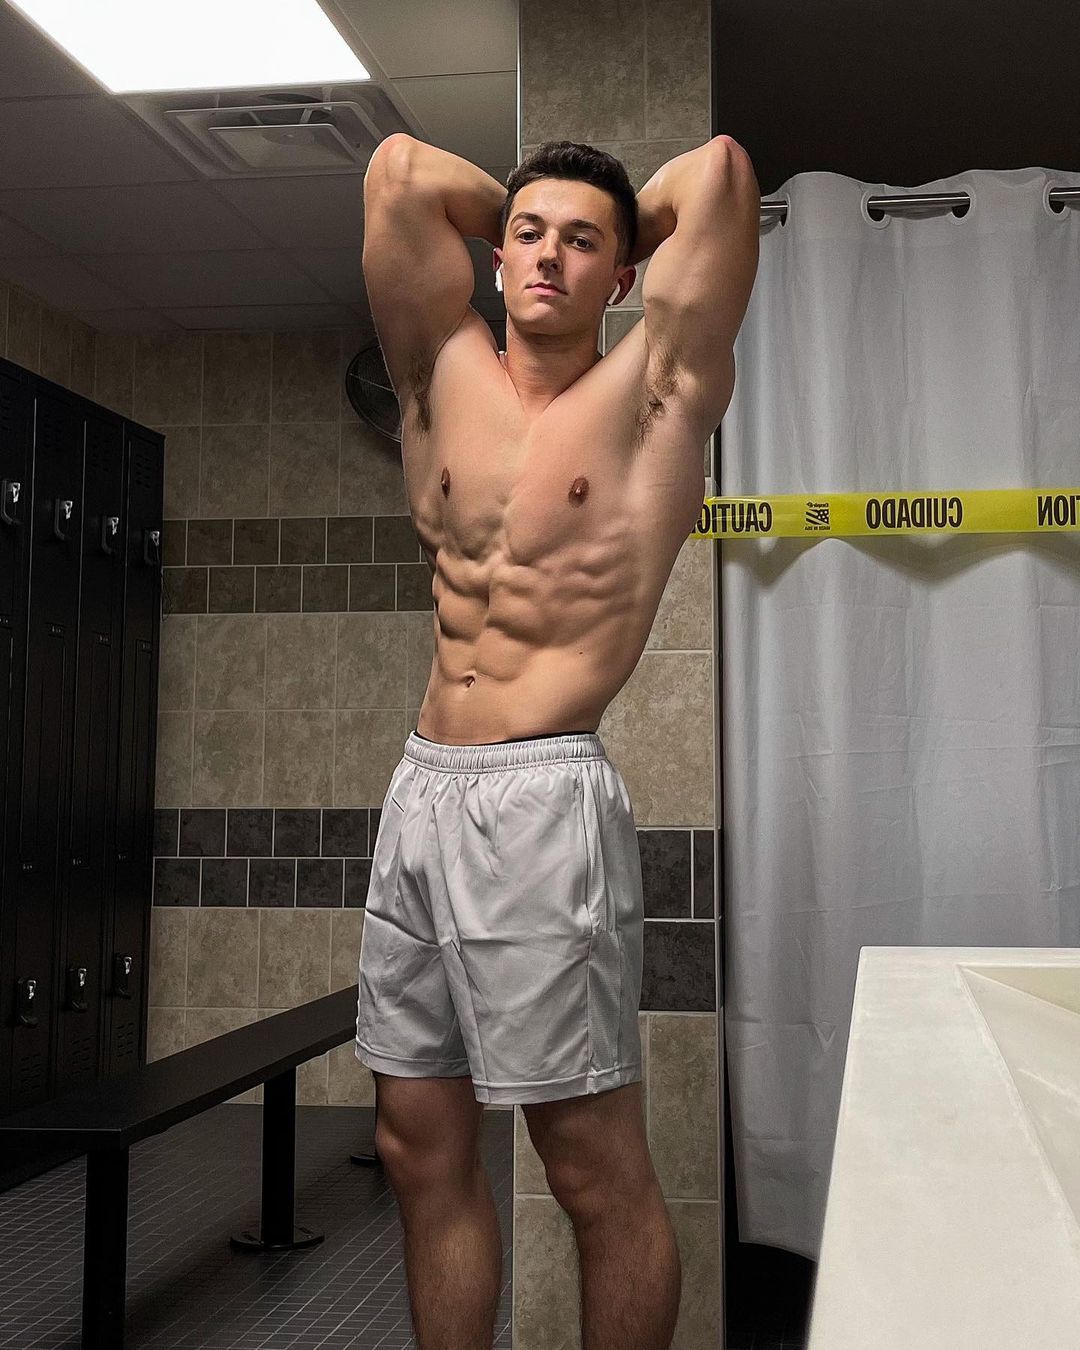 classic-frat-bros-fit-shirtless-body-sexy-college-boys-straight-muscle-teen-hunks-cocky-guy-abs-flex